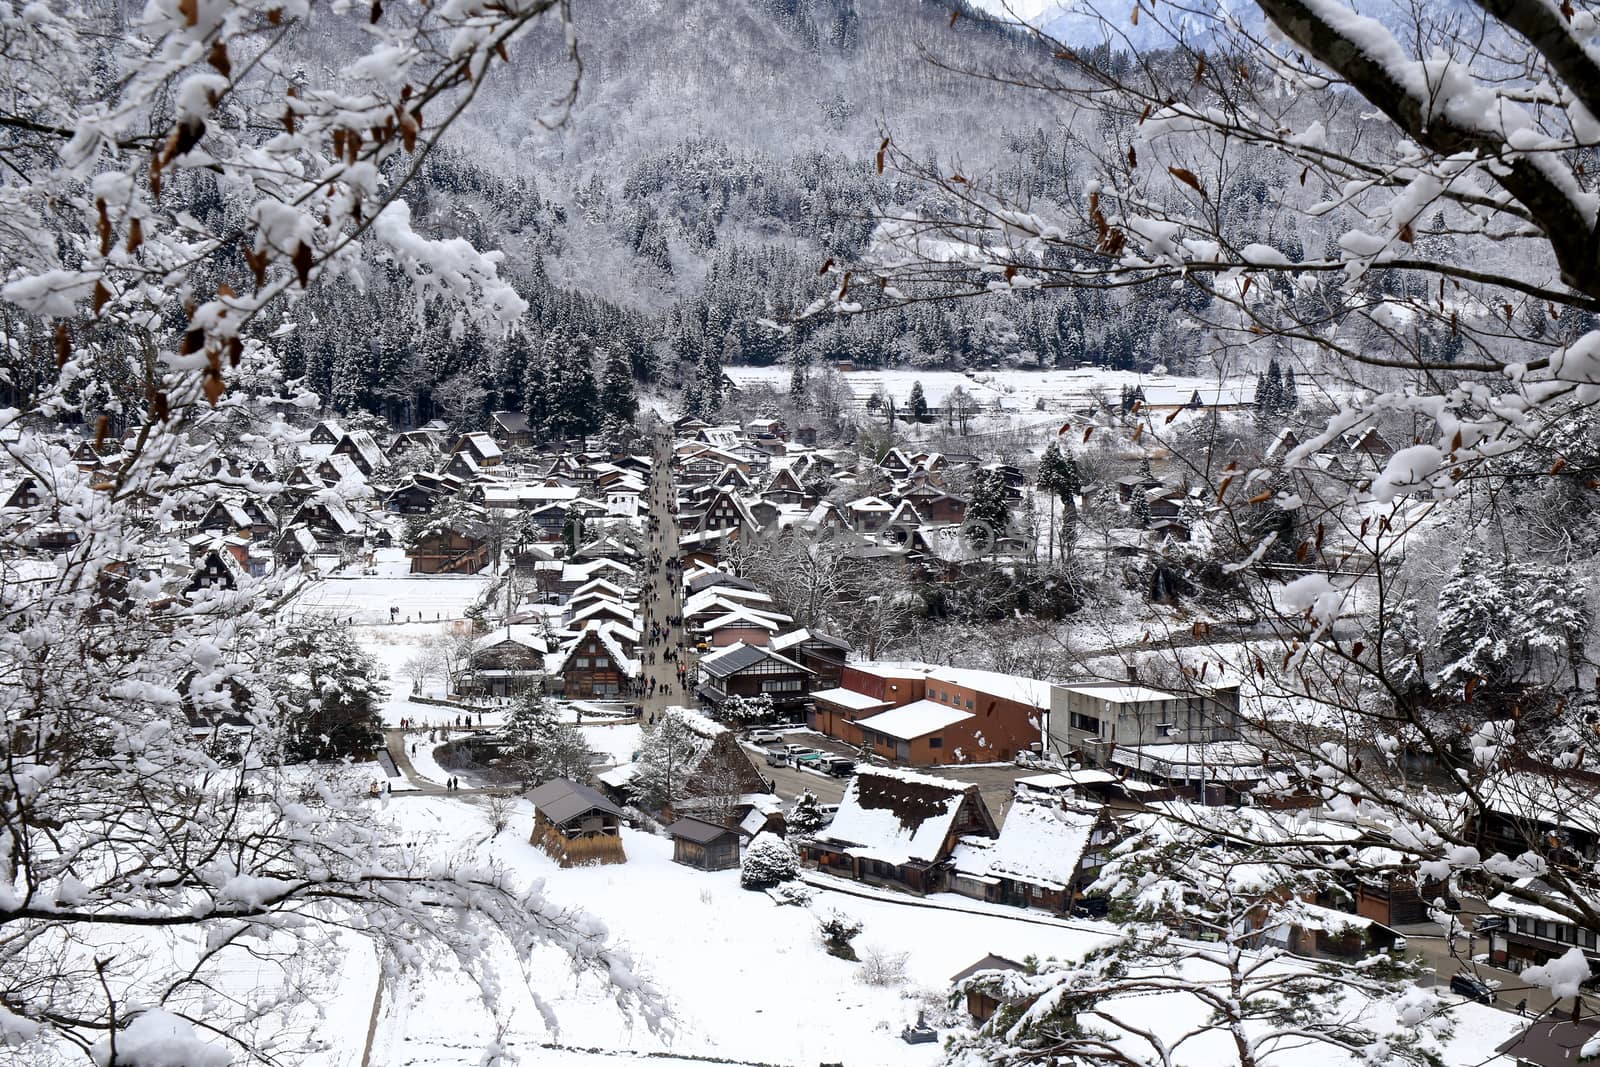 A Shot of Shirakawa-go looking through the trees on the mountainside